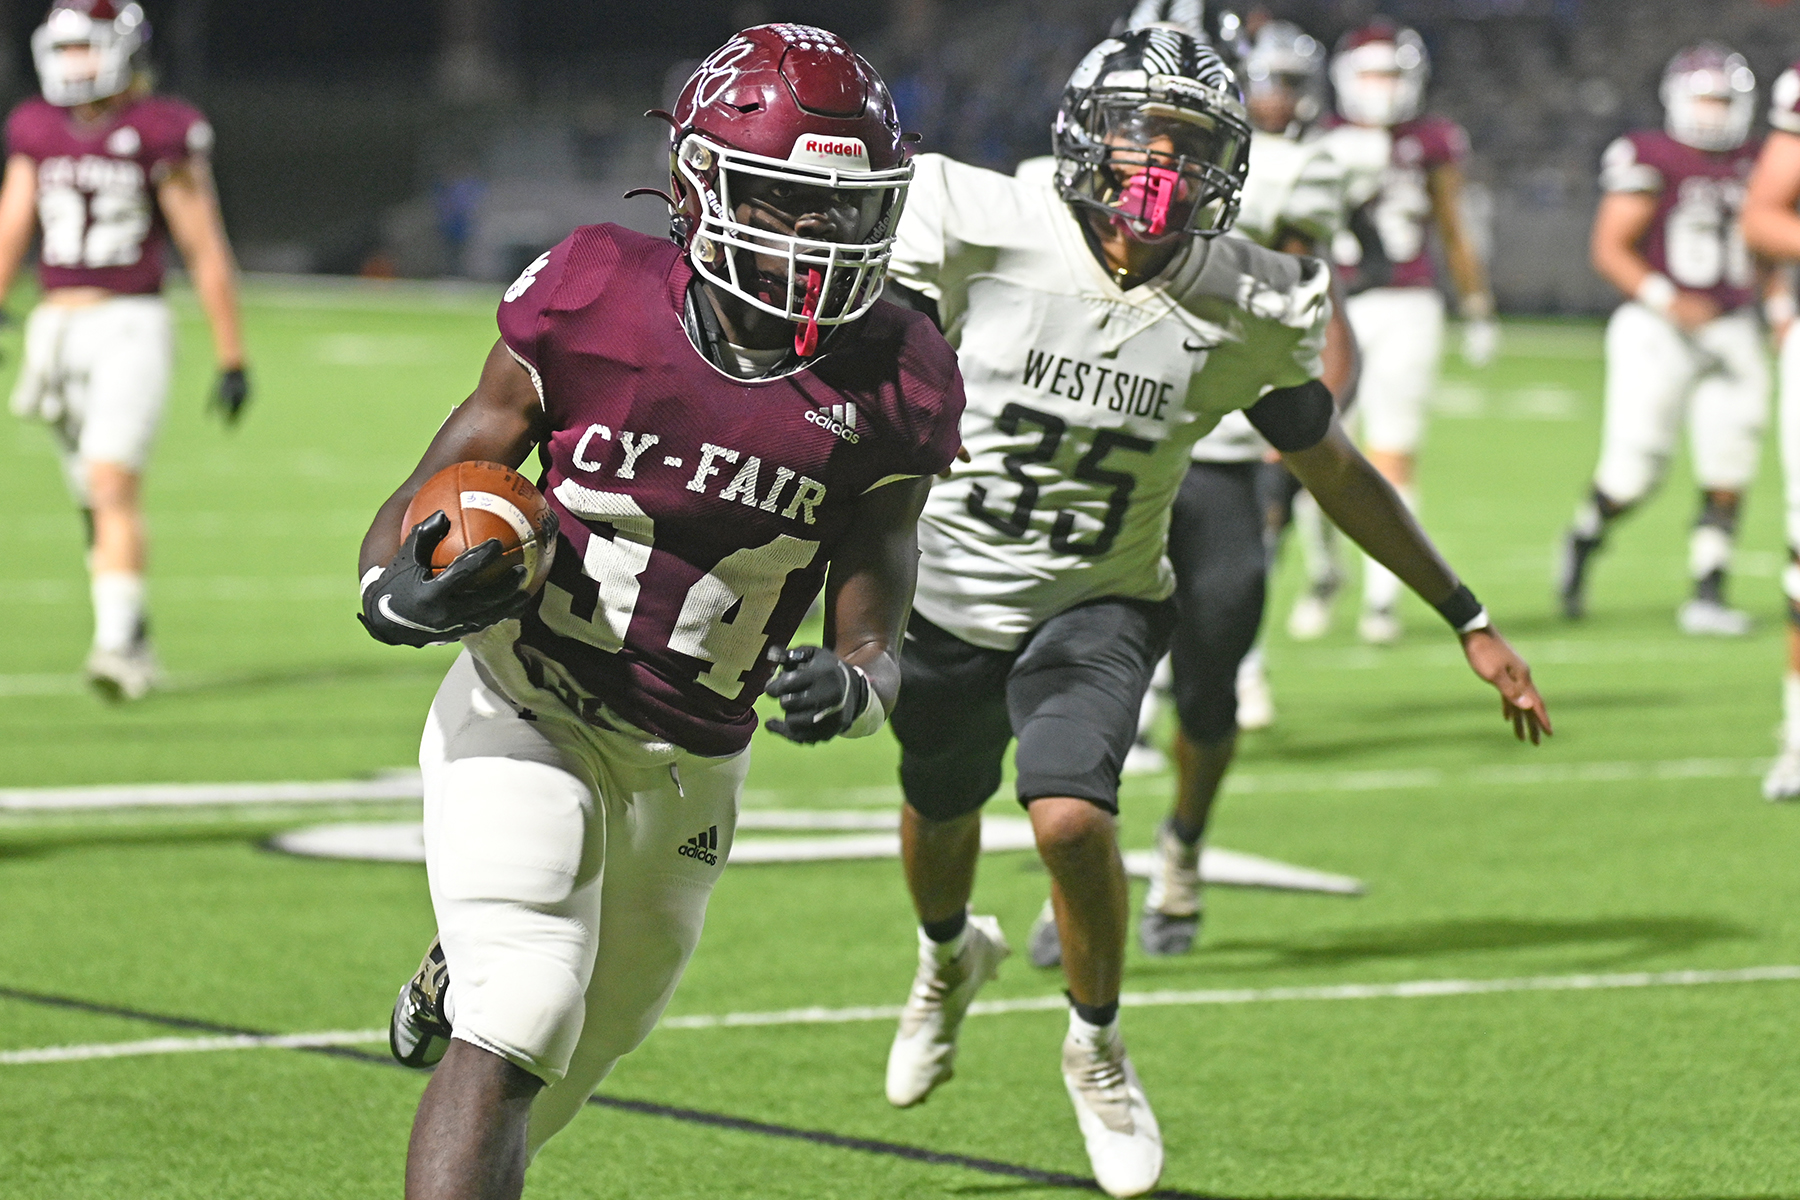 Football Playoffs Continue for Cy-Fair, Cypress Falls in Area Round